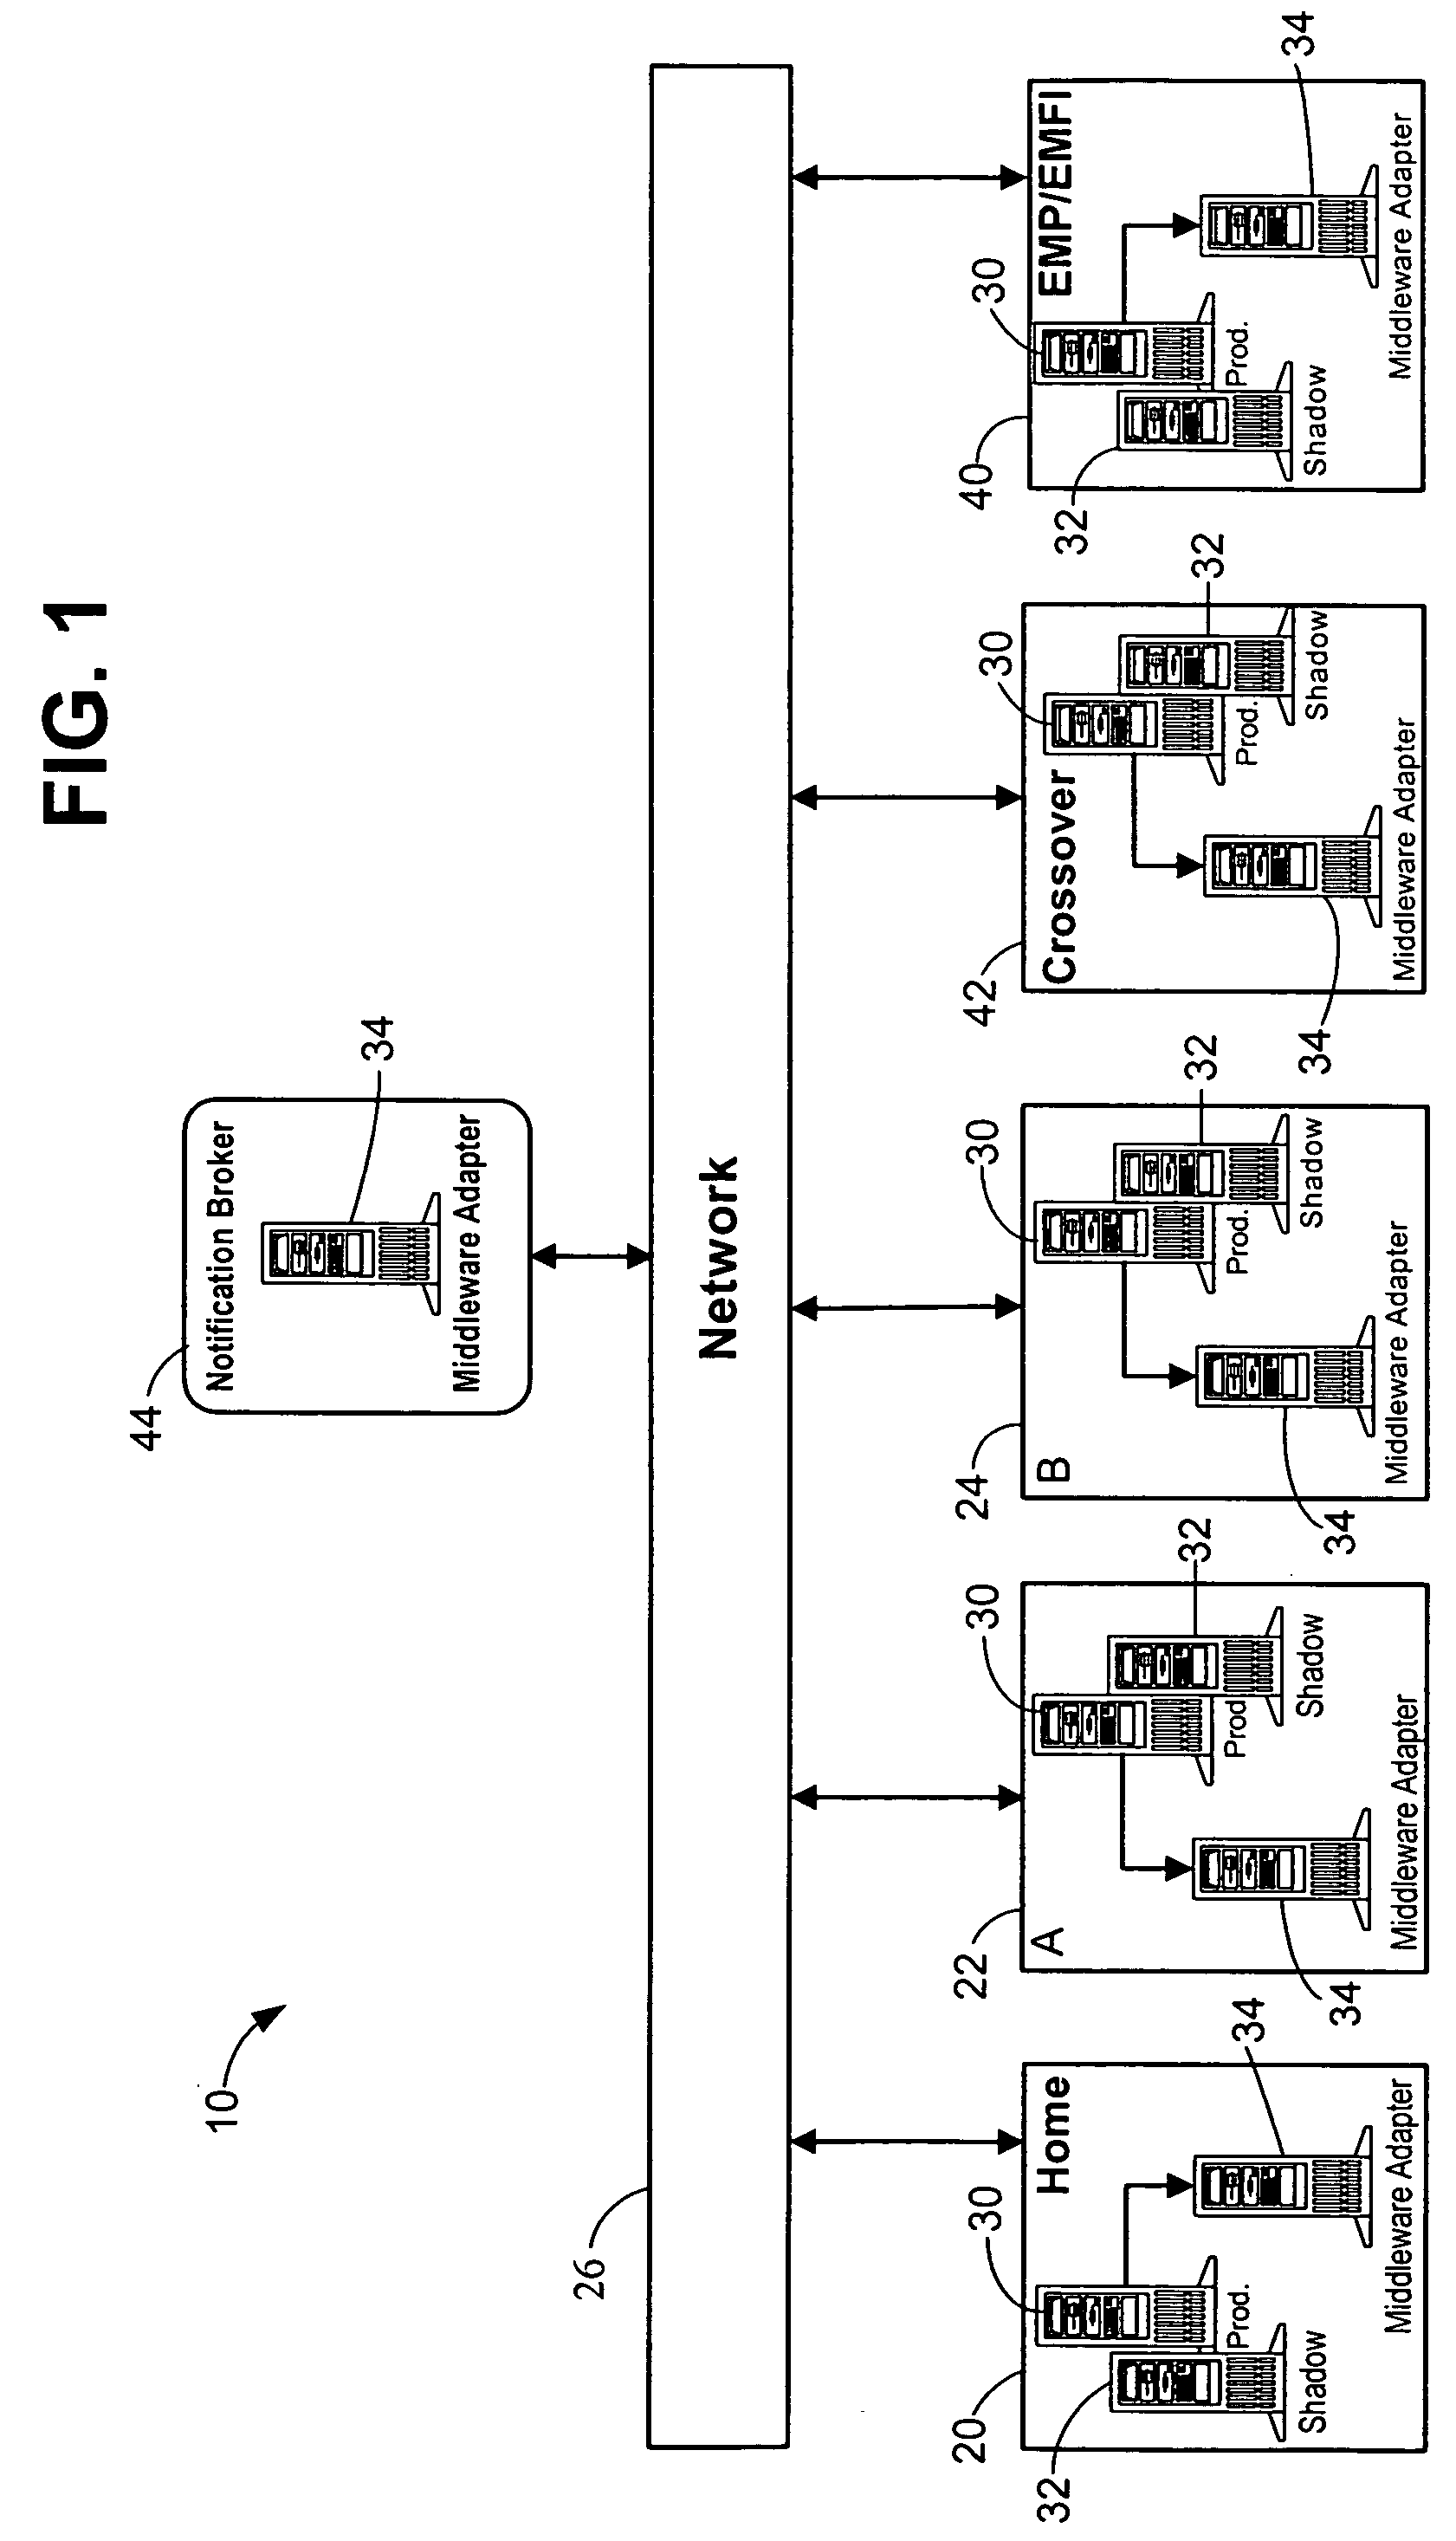 System and method of synchronizing data sets across distributed systems